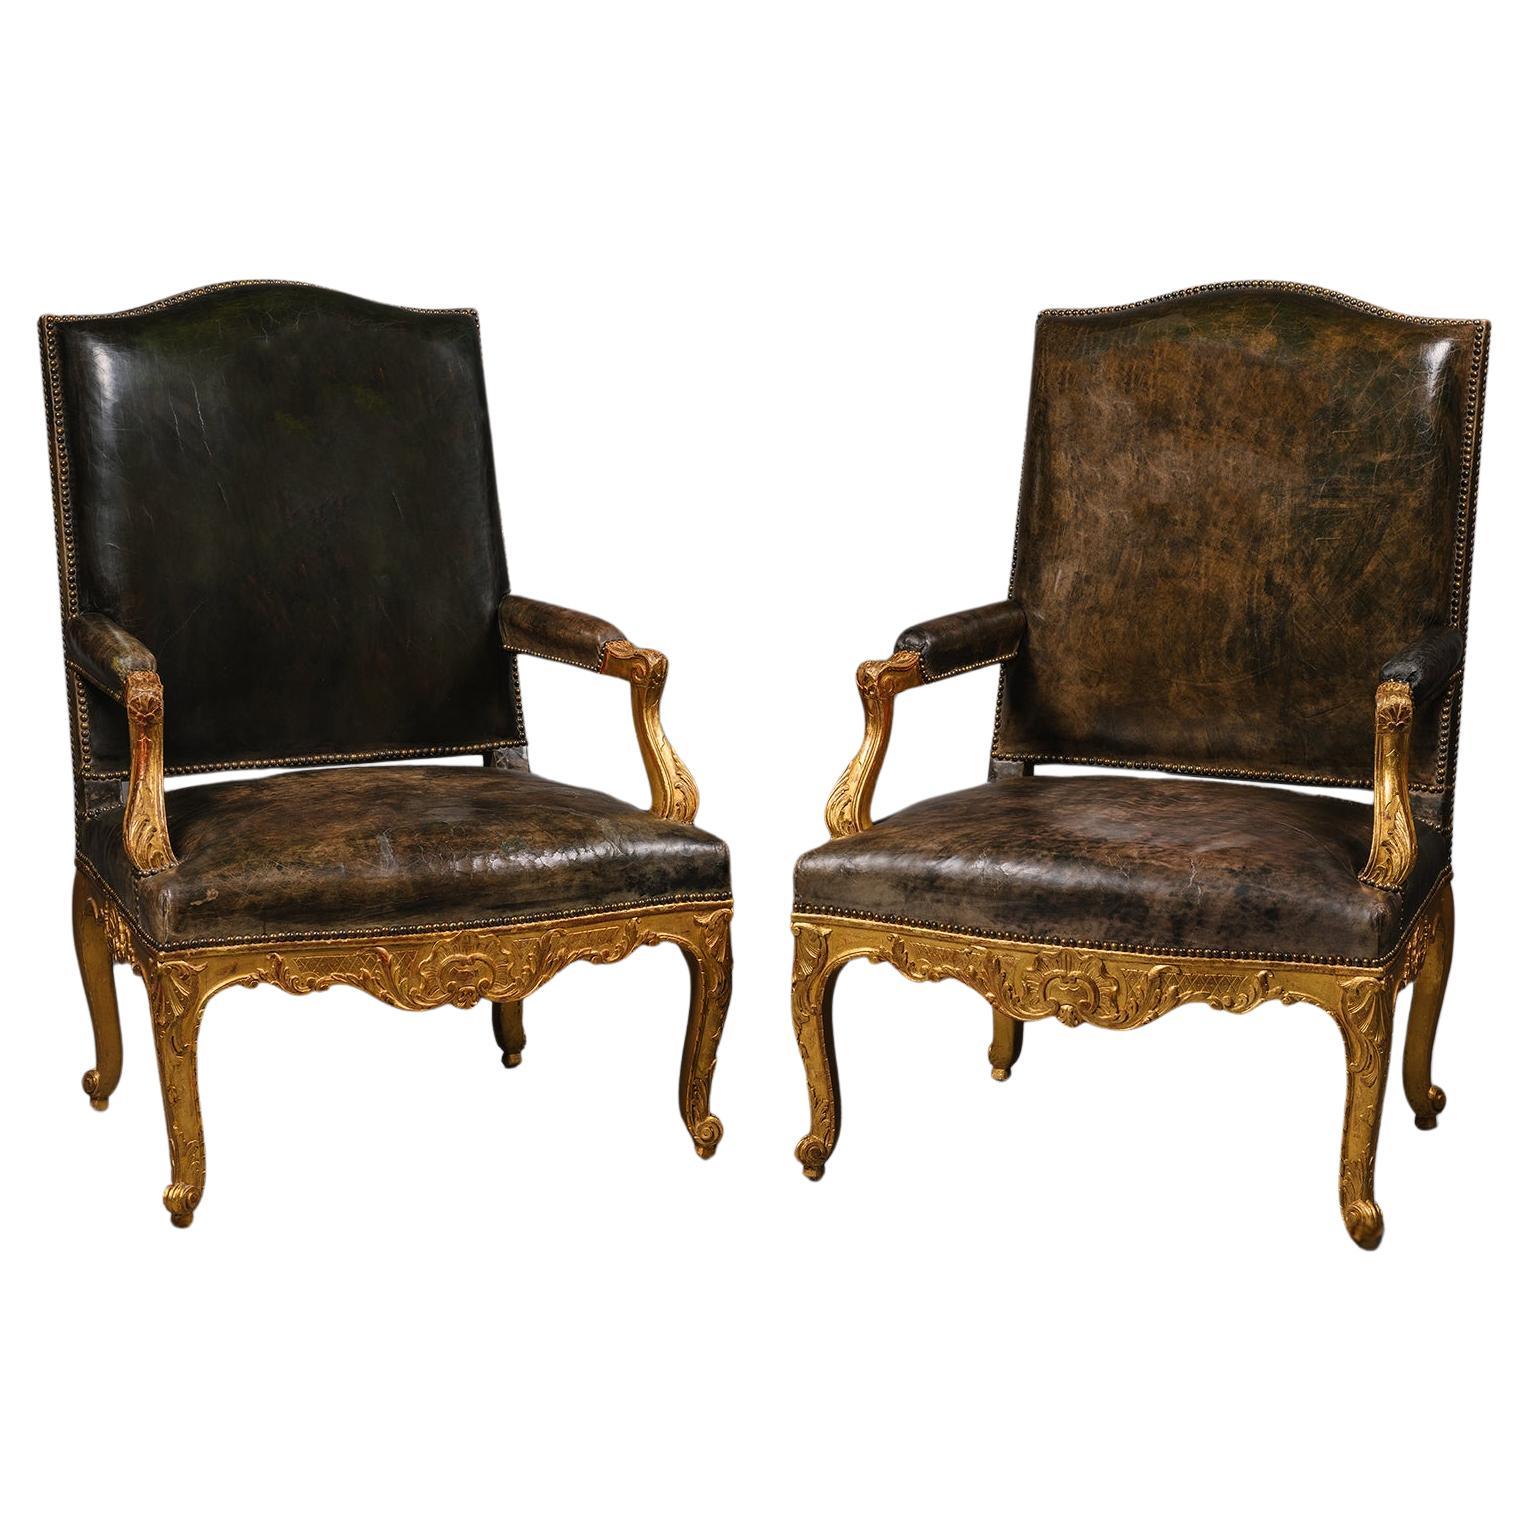 A Pair of Regence Style Giltwood Fauteuils